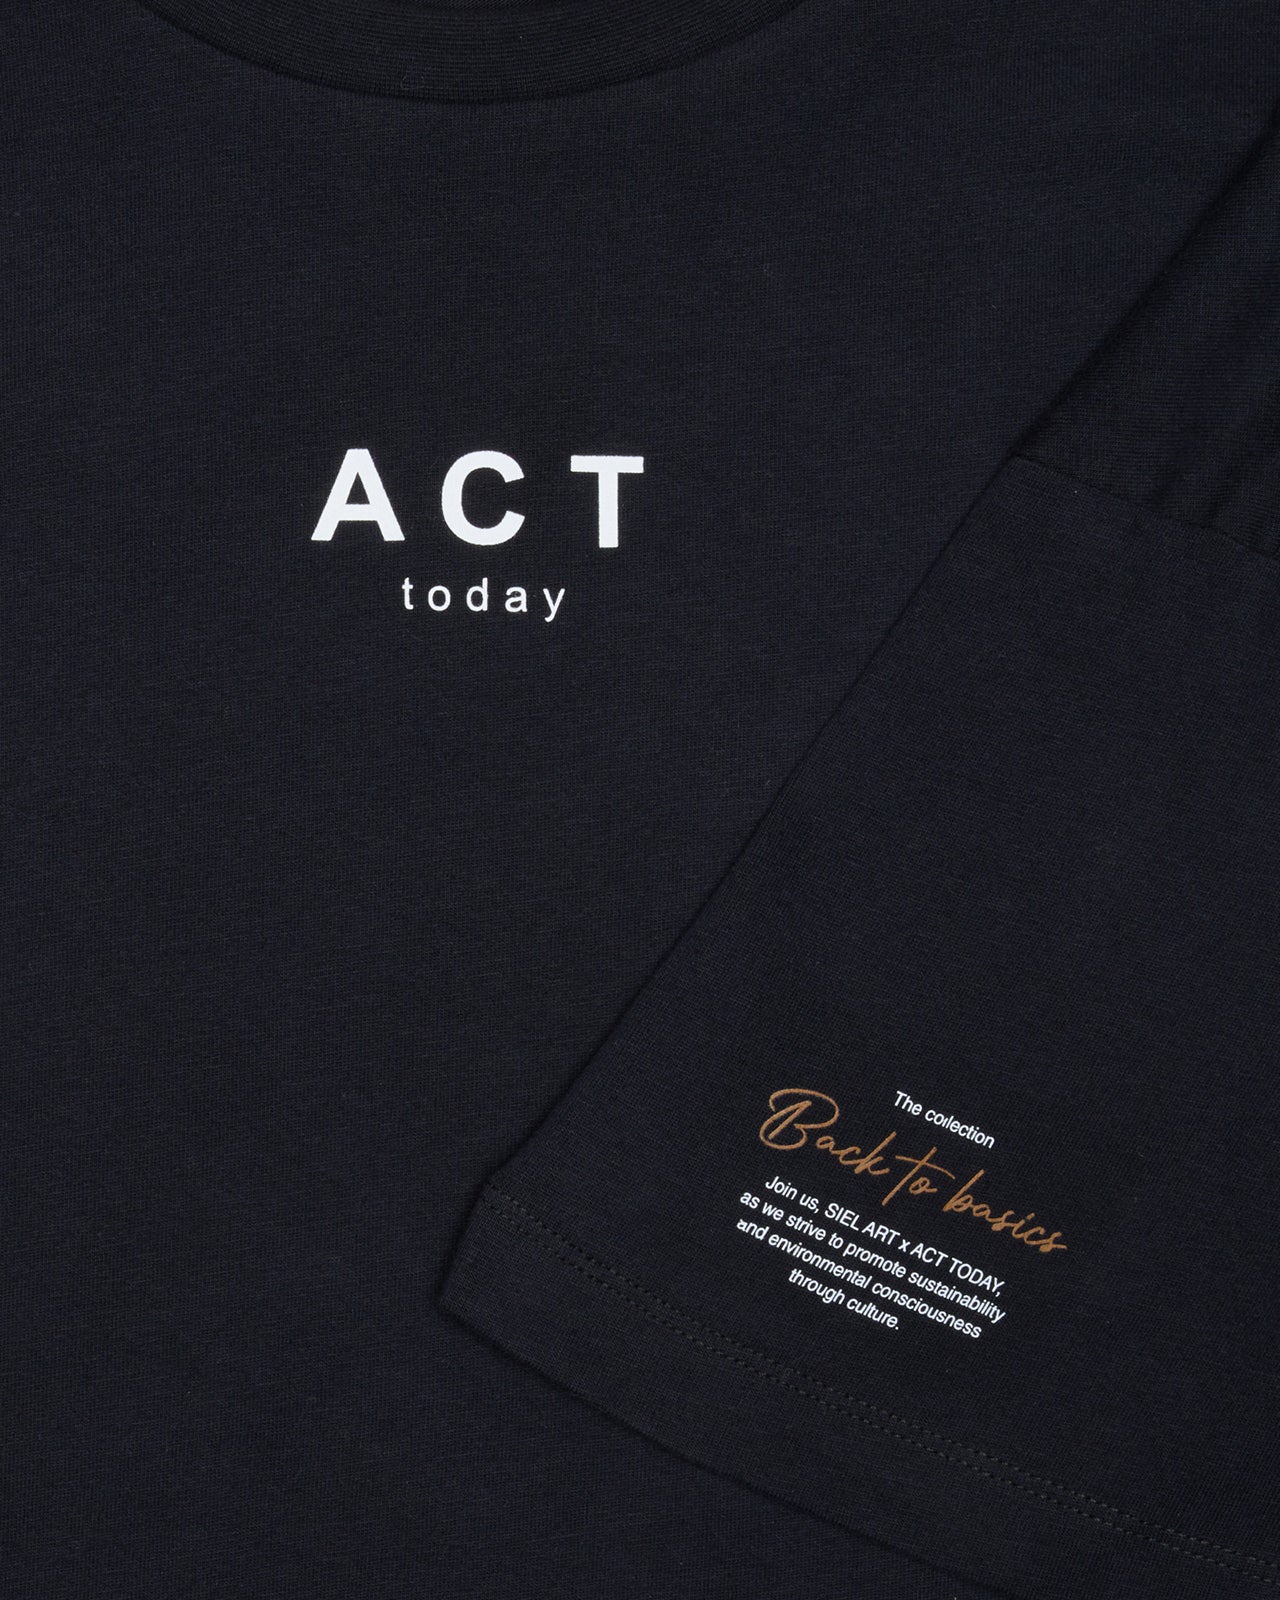 ACT today SIEL ART x ACT TODAY - COLLAB t-shirt COLLAB 101 Wash Black